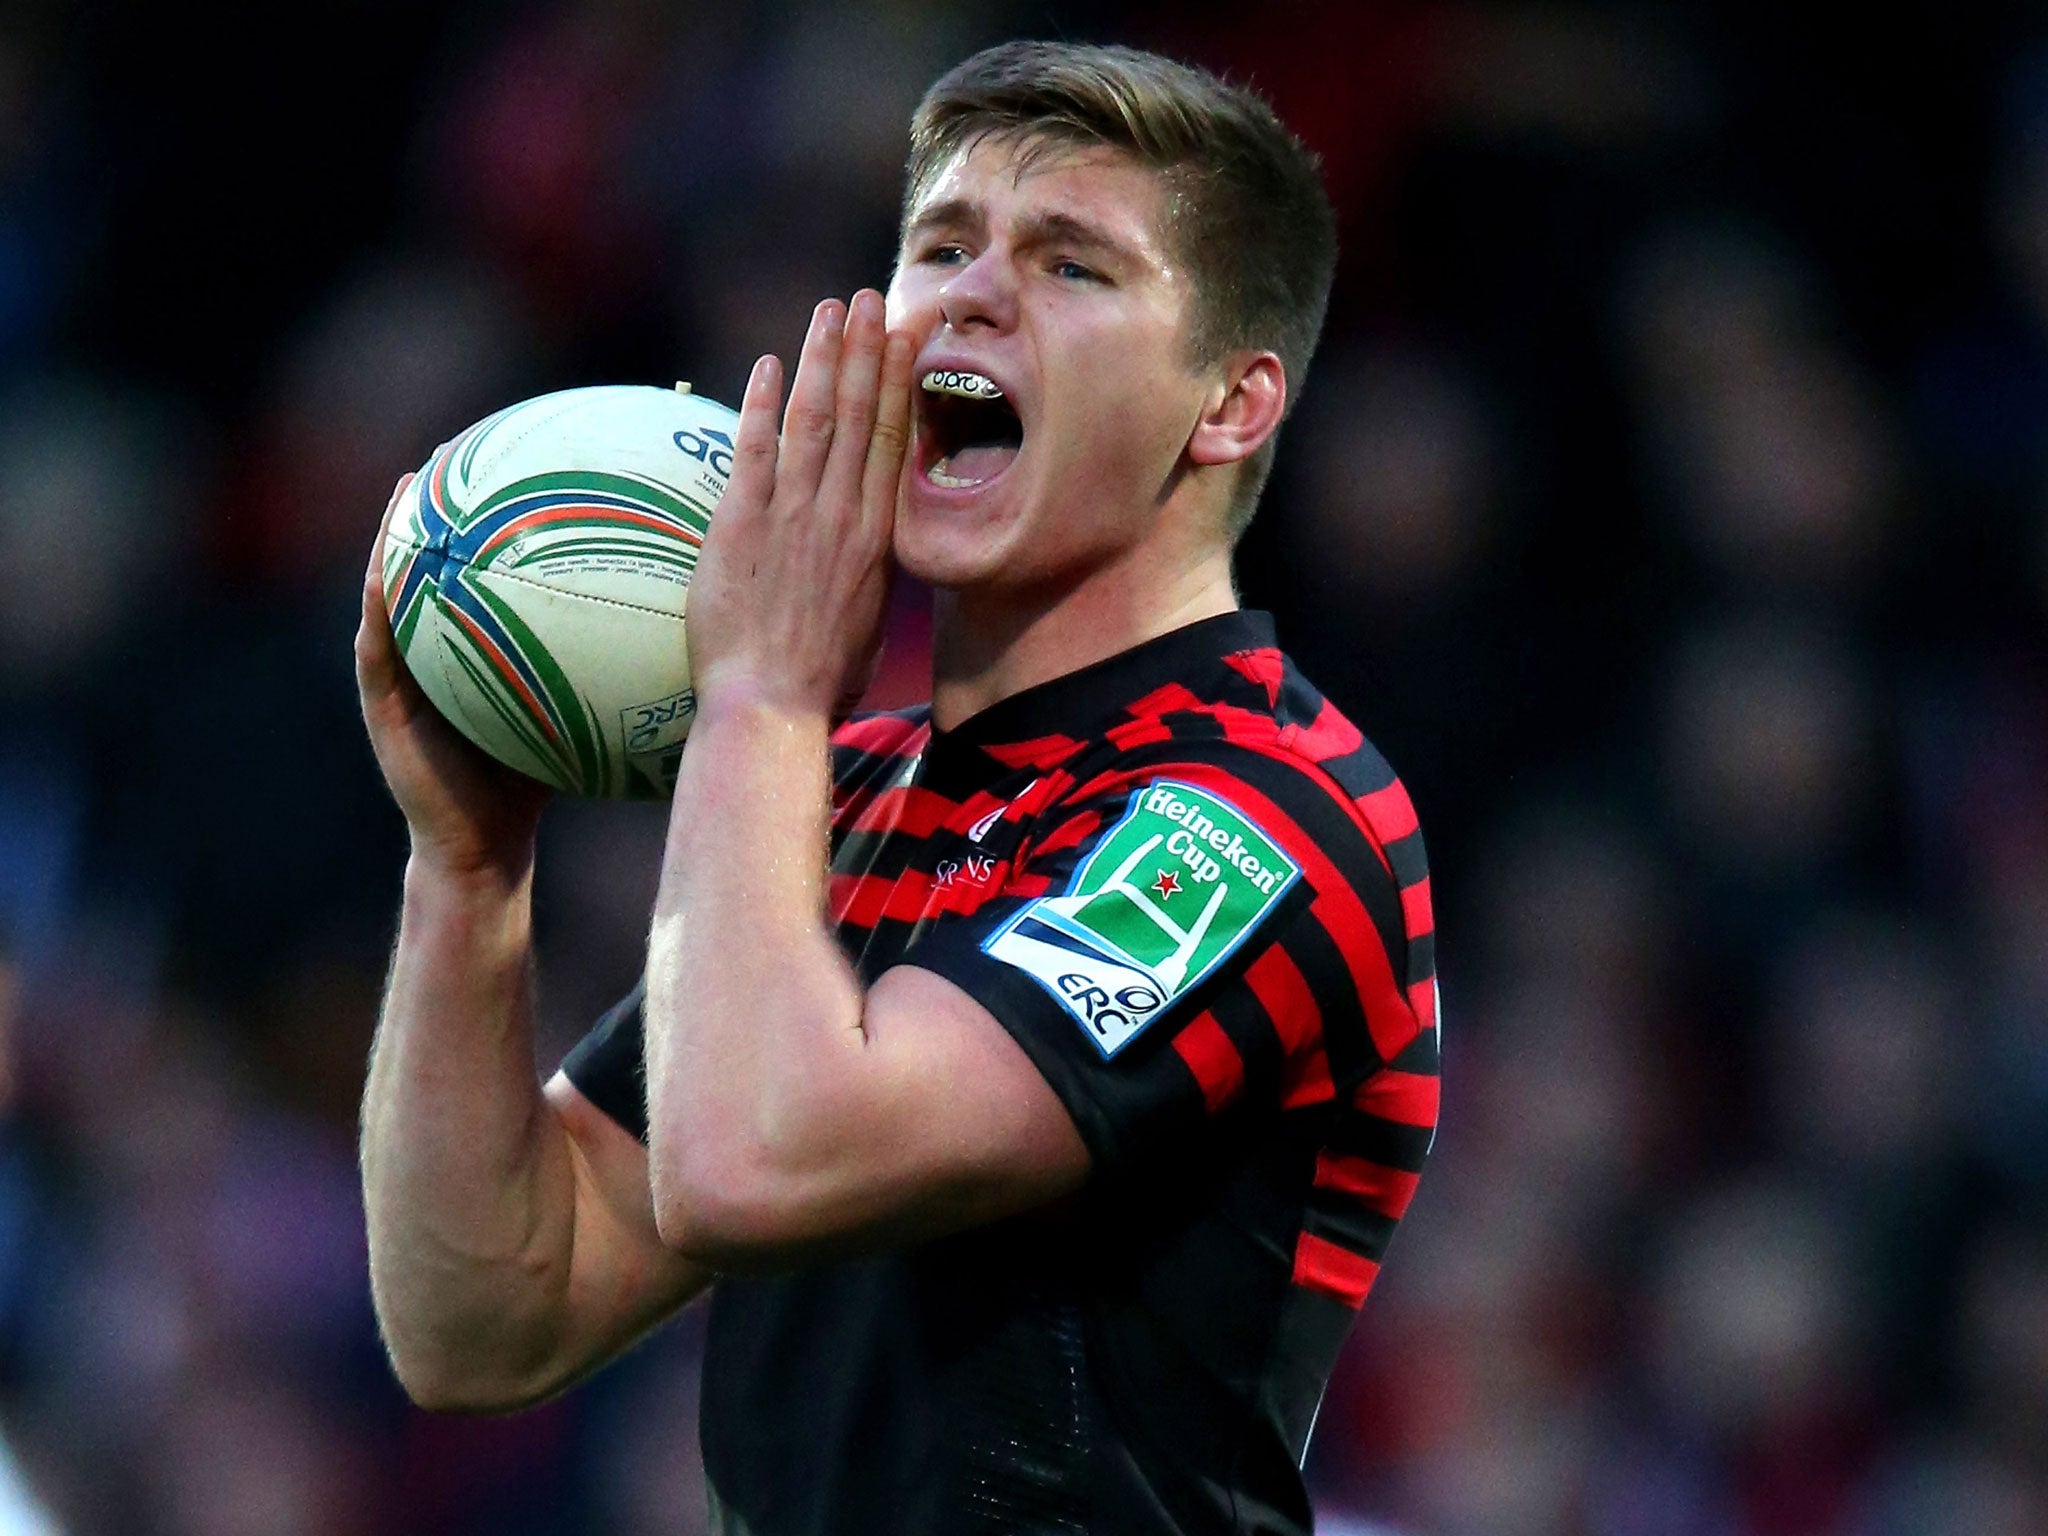 Call to arms: Owen Farrell says the climax to the season is not all about winning silverware, ‘It’s about how everyone works hard for each other’